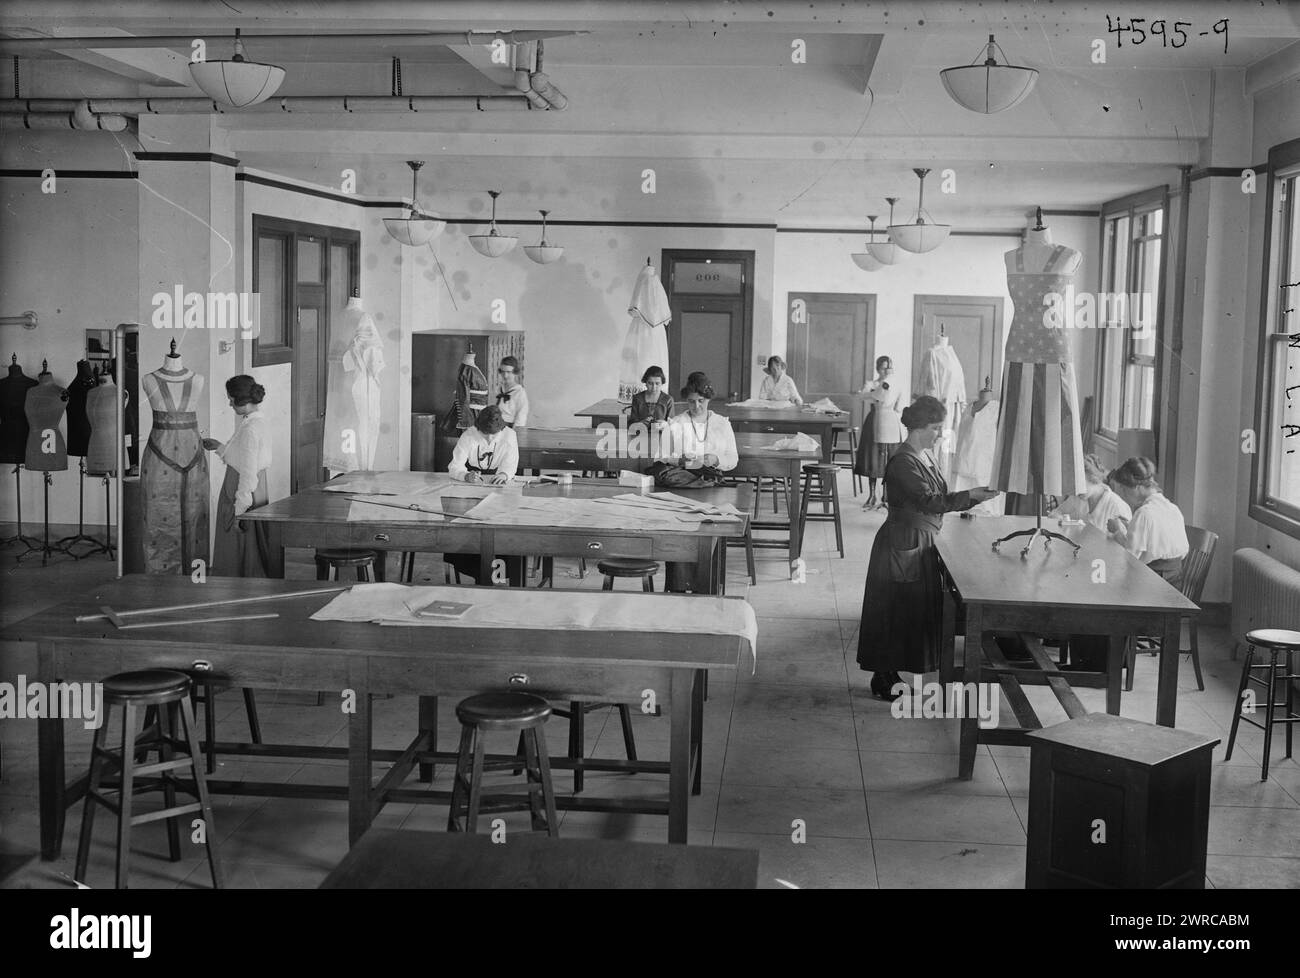 Y.W.C.A., Photograph shows women making dresses at the Y.W.C.A during World War I. One dress has a striped skirt and star-patterned top which resembles an American flag., between ca. 1915 and 1918, World War, 1914-1918, Glass negatives, 1 negative: glass Stock Photo